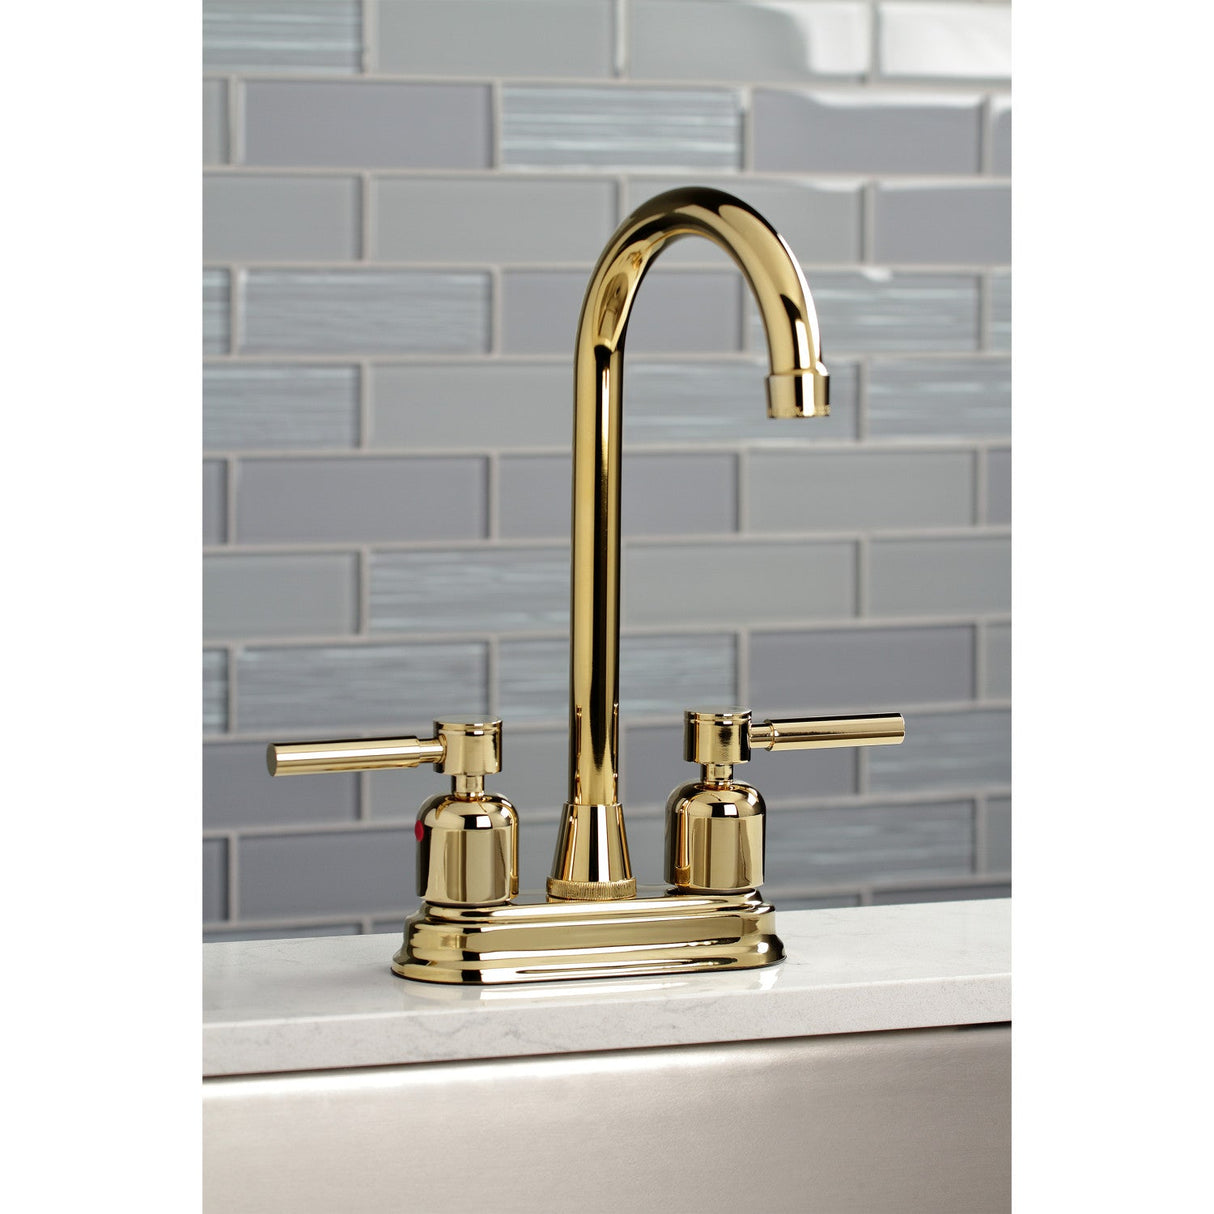 Concord KB8492DL Two-Handle 2-Hole Deck Mount Bar Faucet, Polished Brass